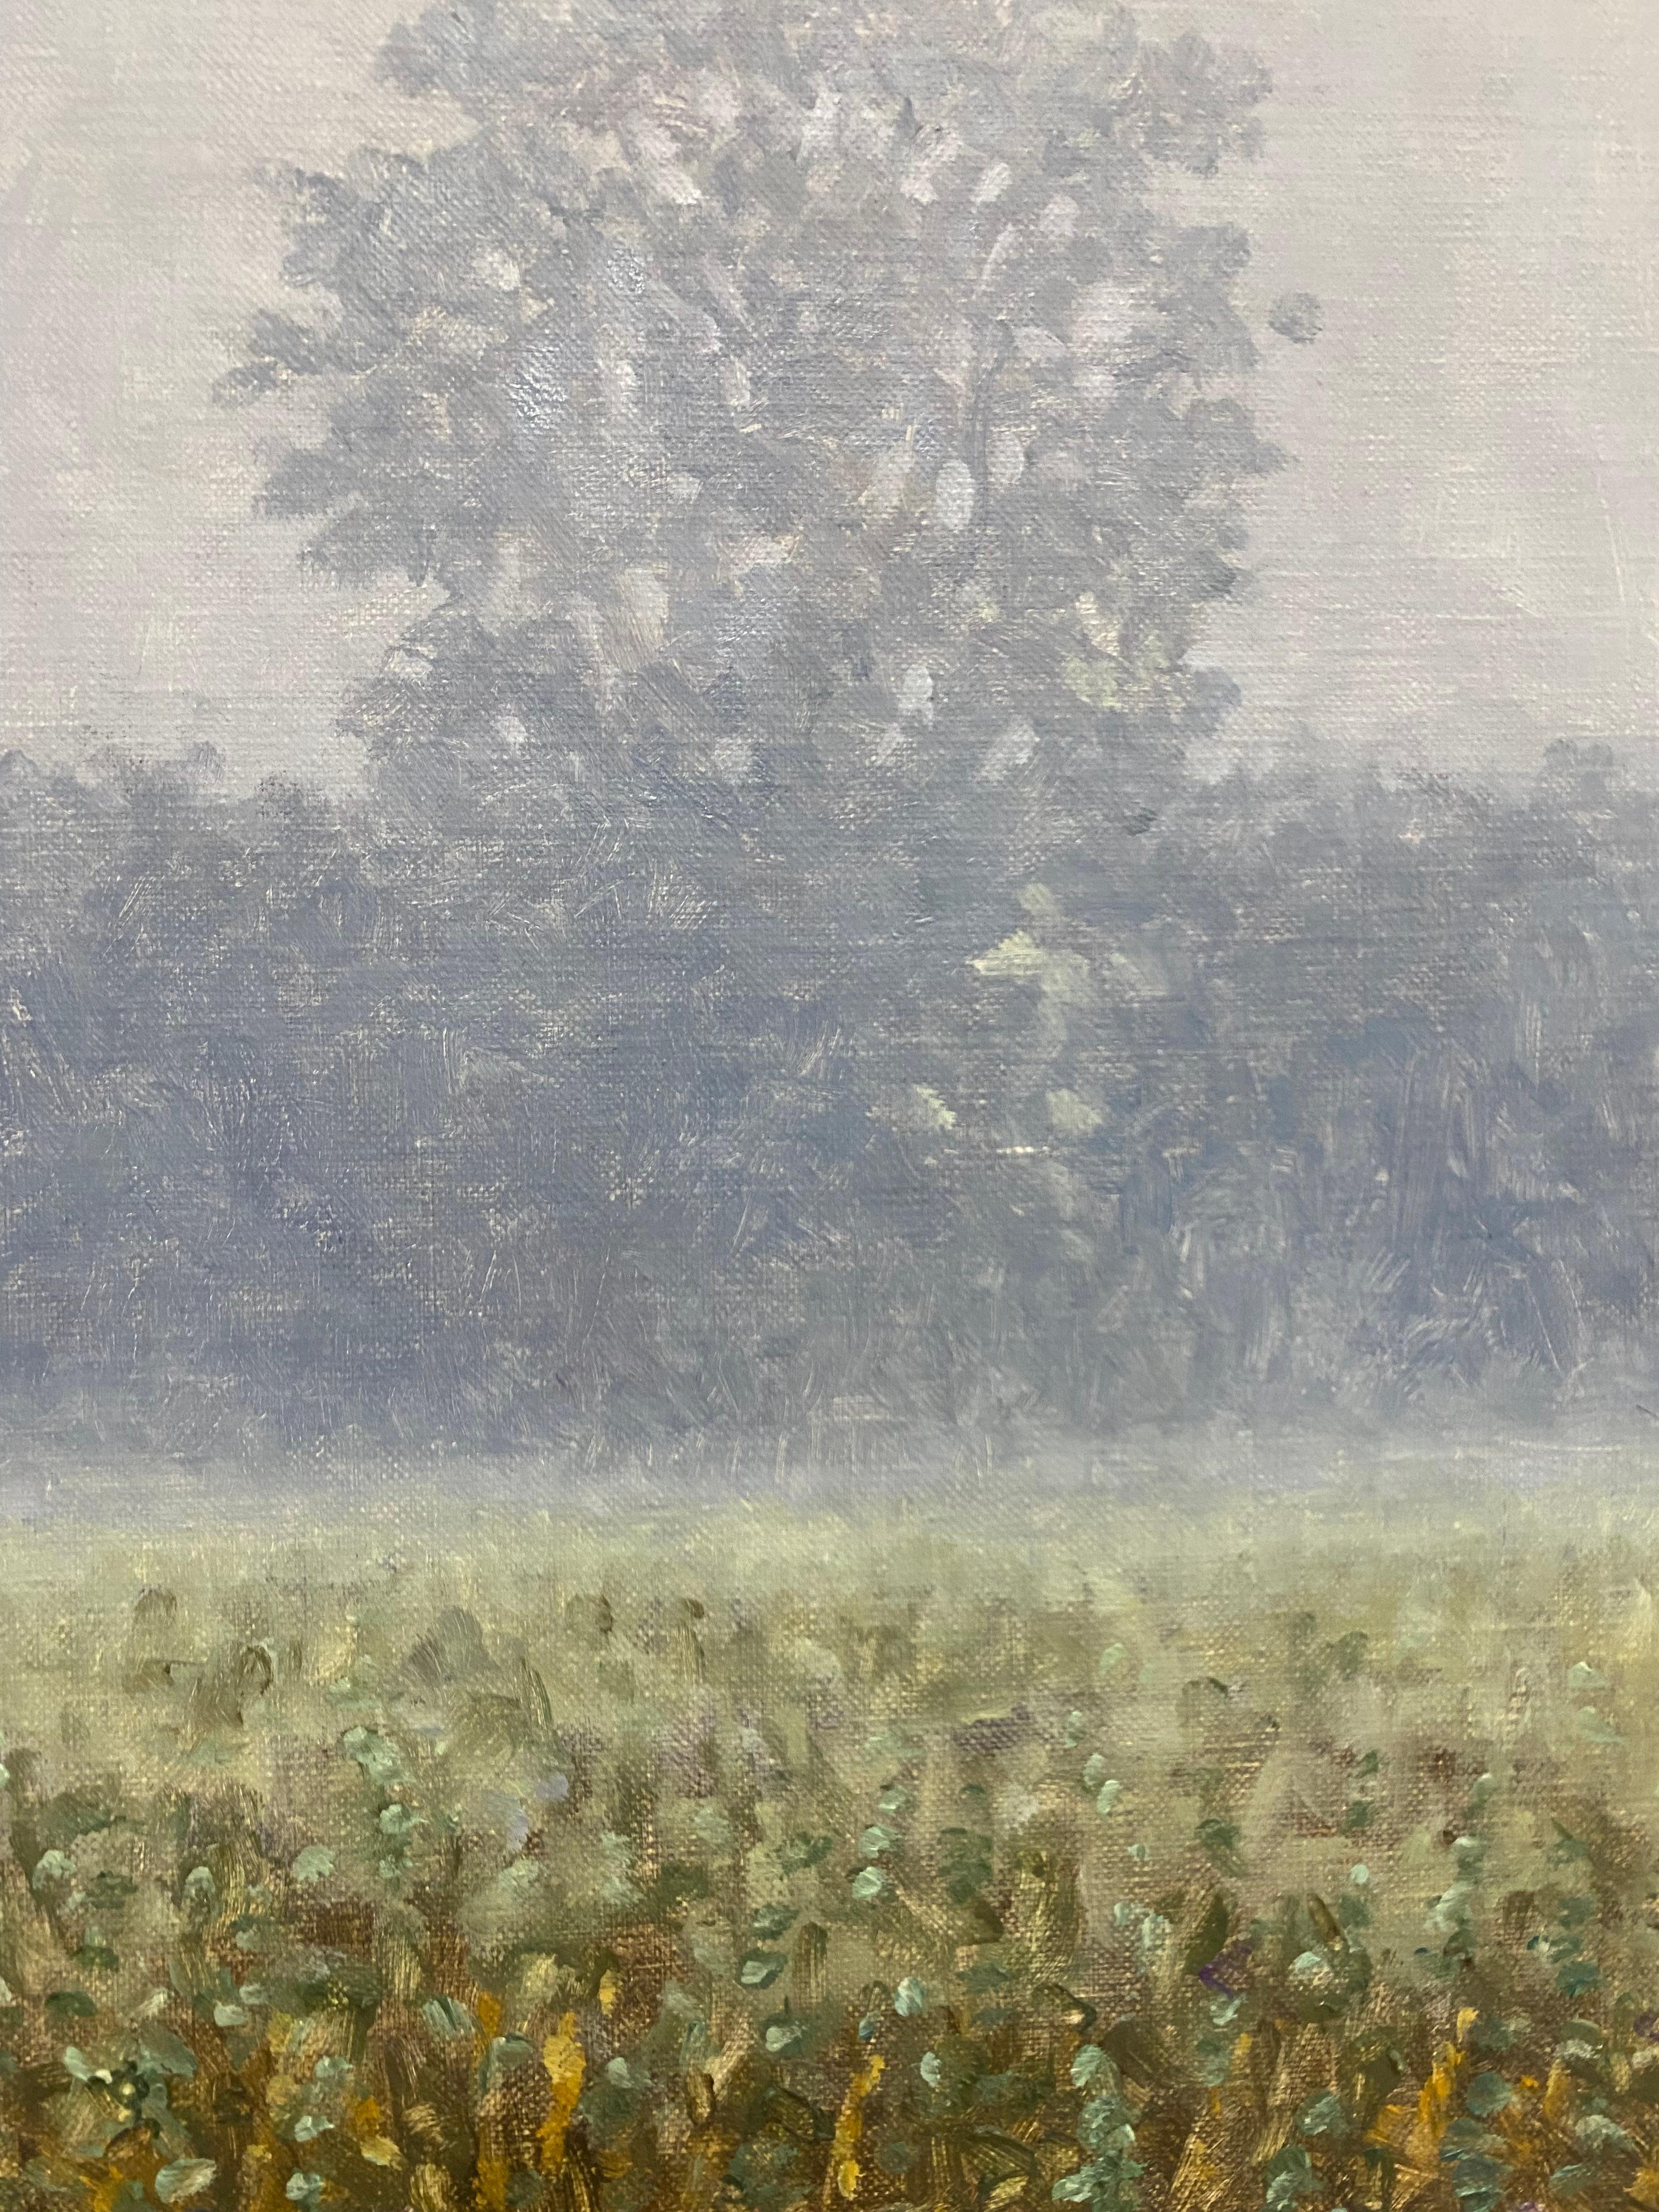 Field Painting August 31 2021, Landscape in Fog, Trees, Green, Ochre Grass - Gray Landscape Painting by Thomas Sarrantonio